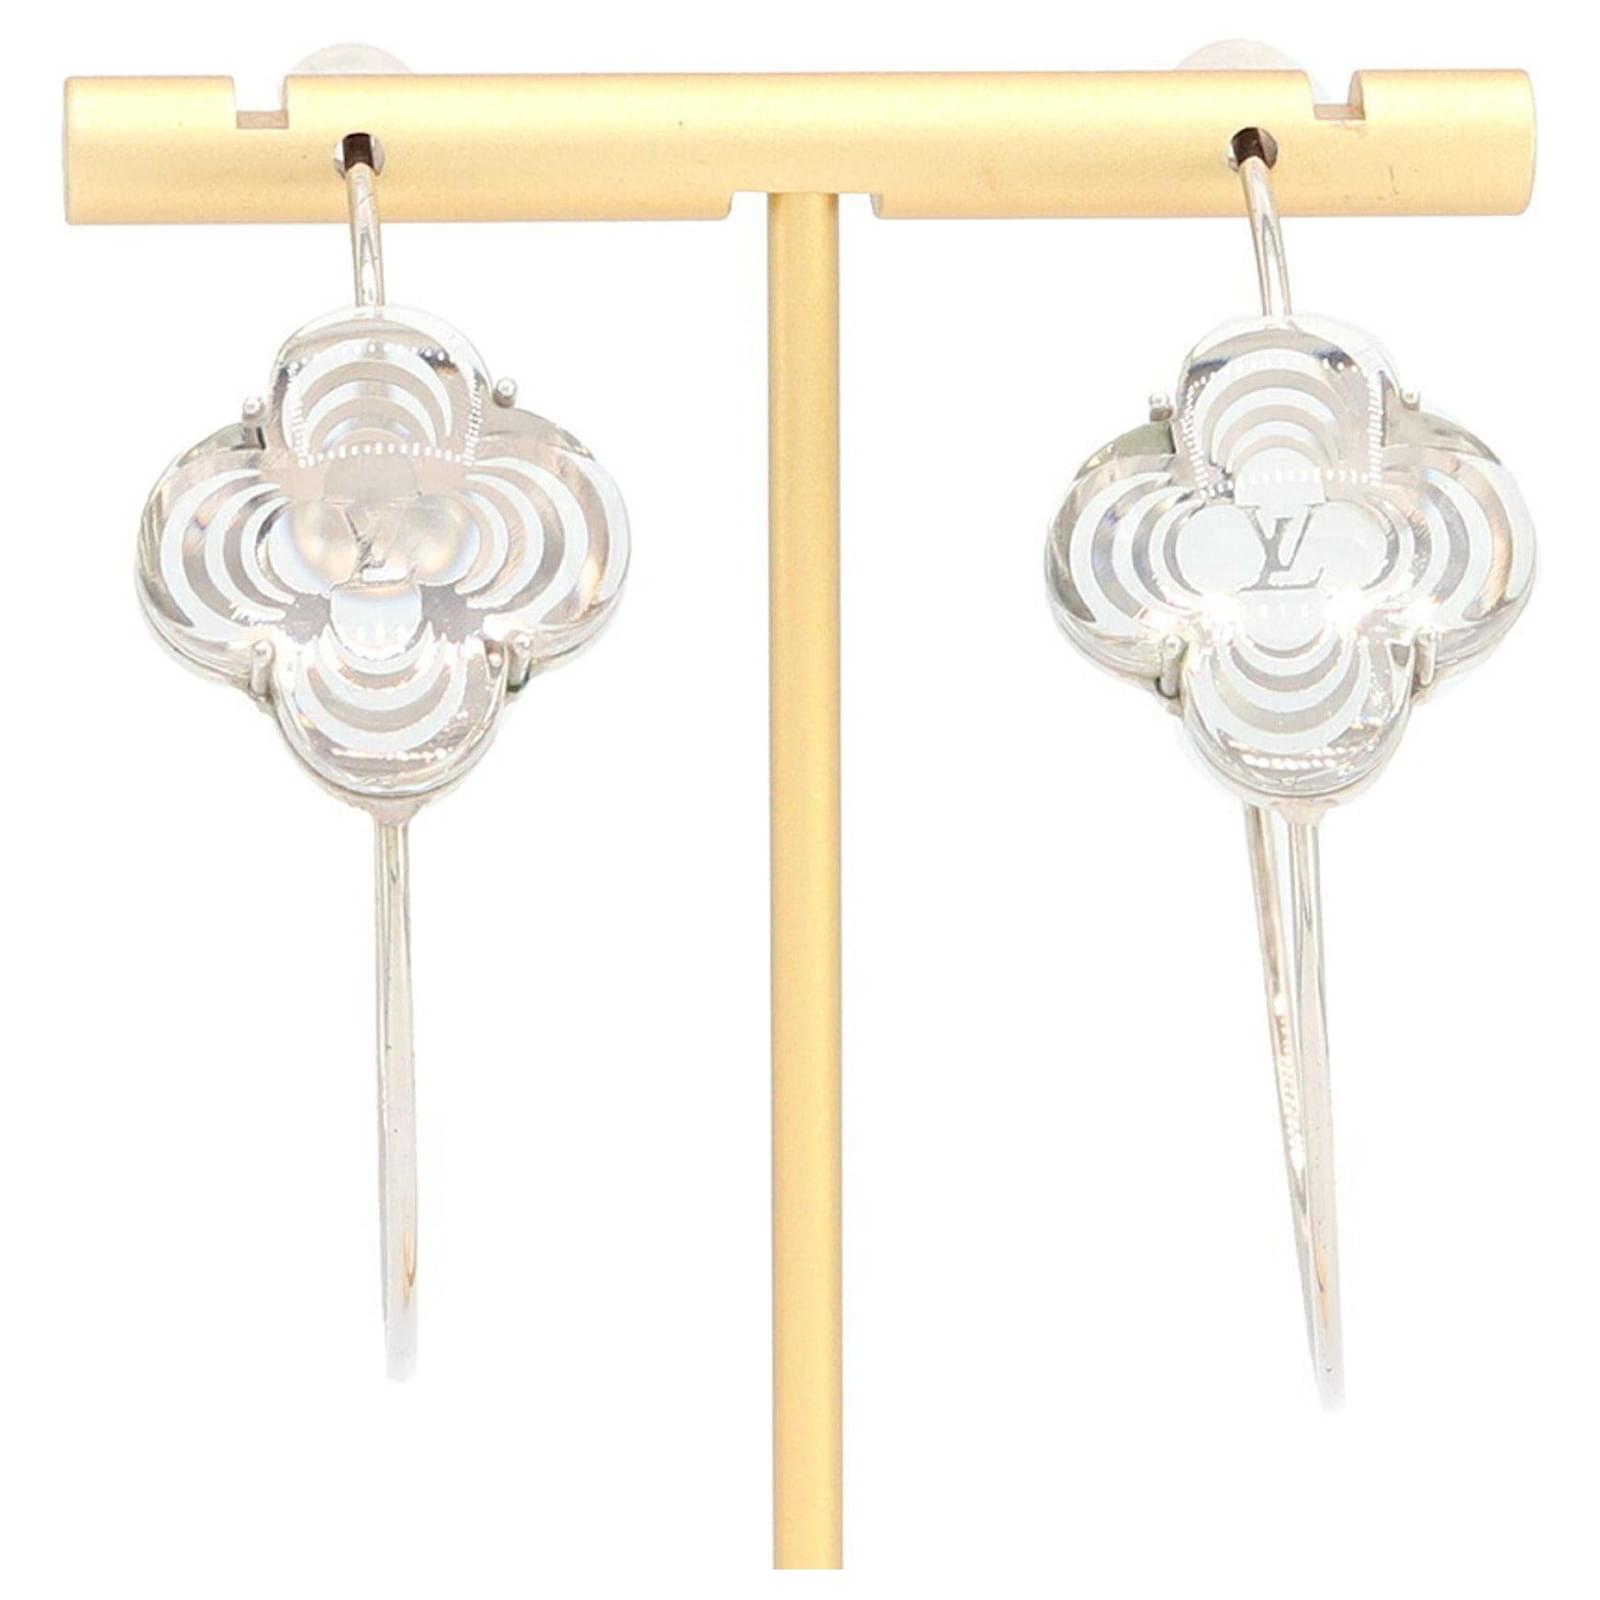 Louis Vuitton LV Edge MM Earrings Gold in Gold Metal with Gold